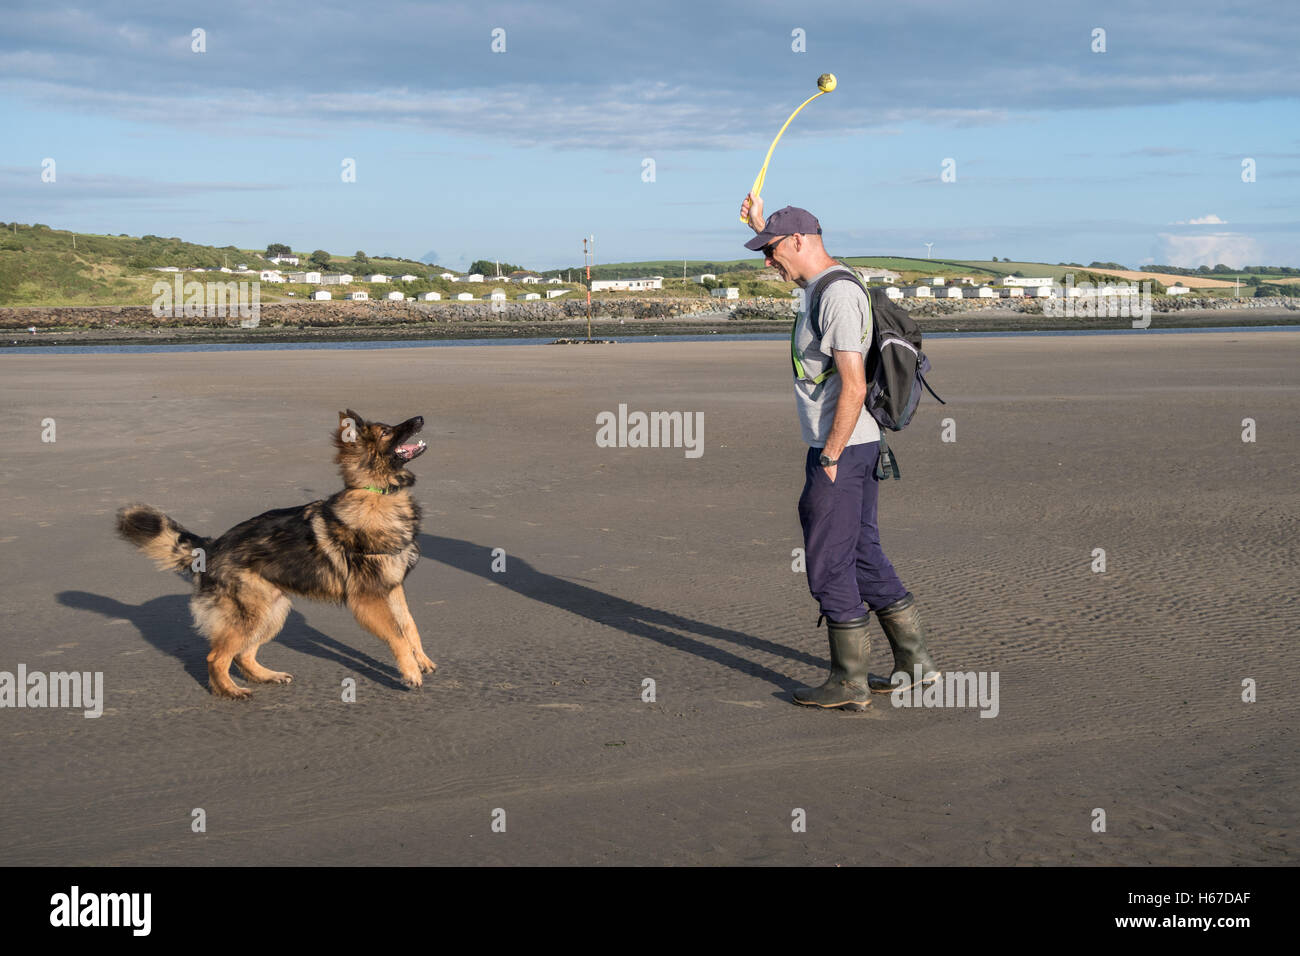 Man throwing a ball for his dog on the beach. They are having fun playing a game together Stock Photo